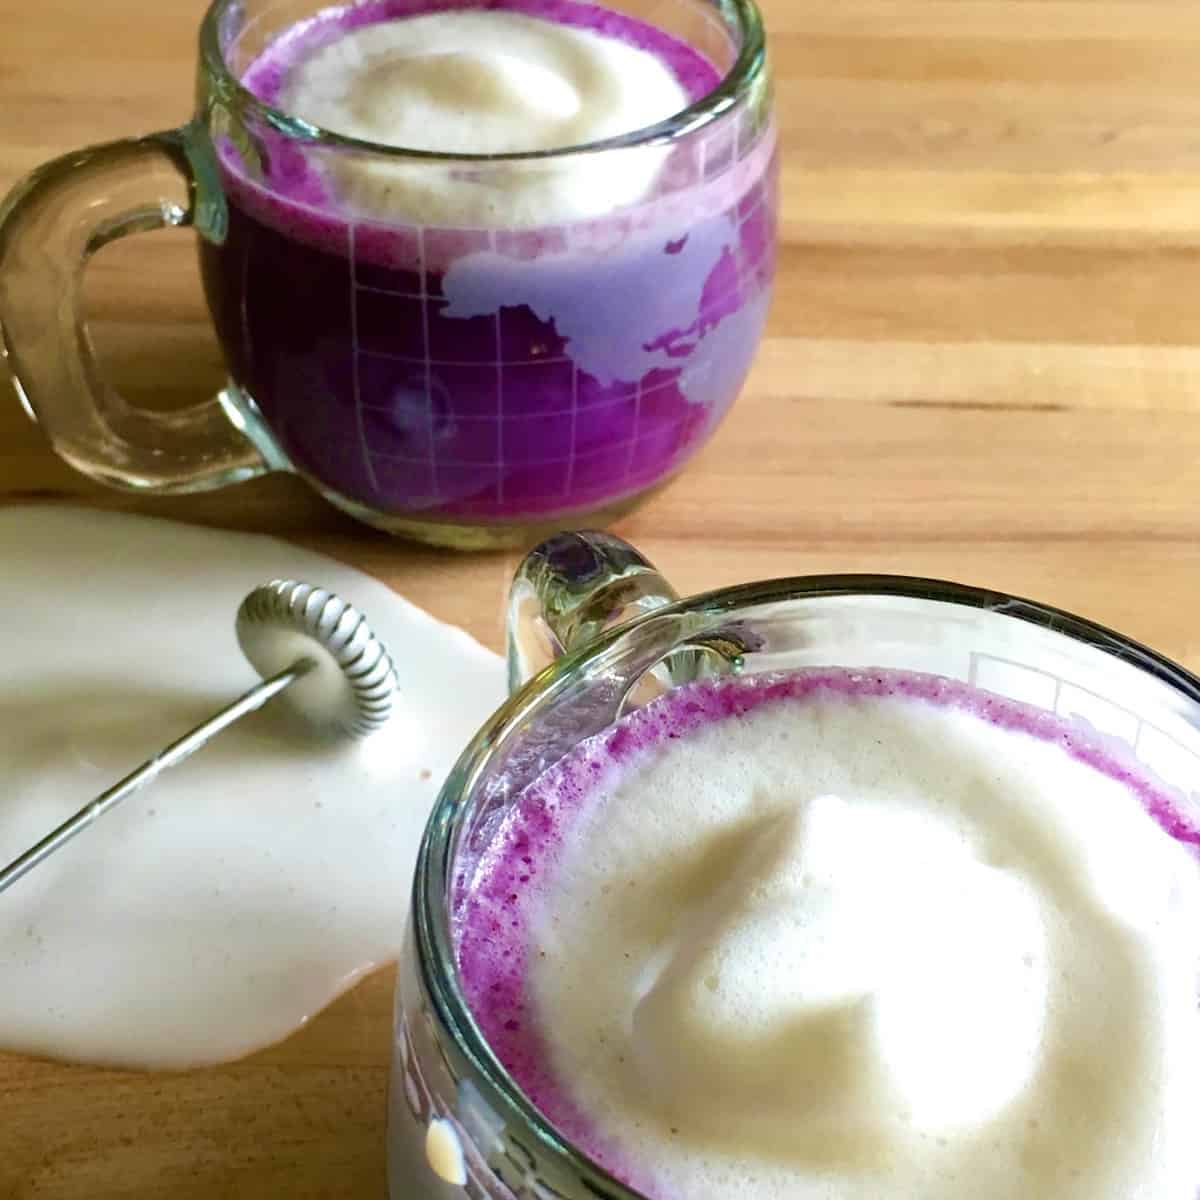 Blueberry latte with spilled milk.